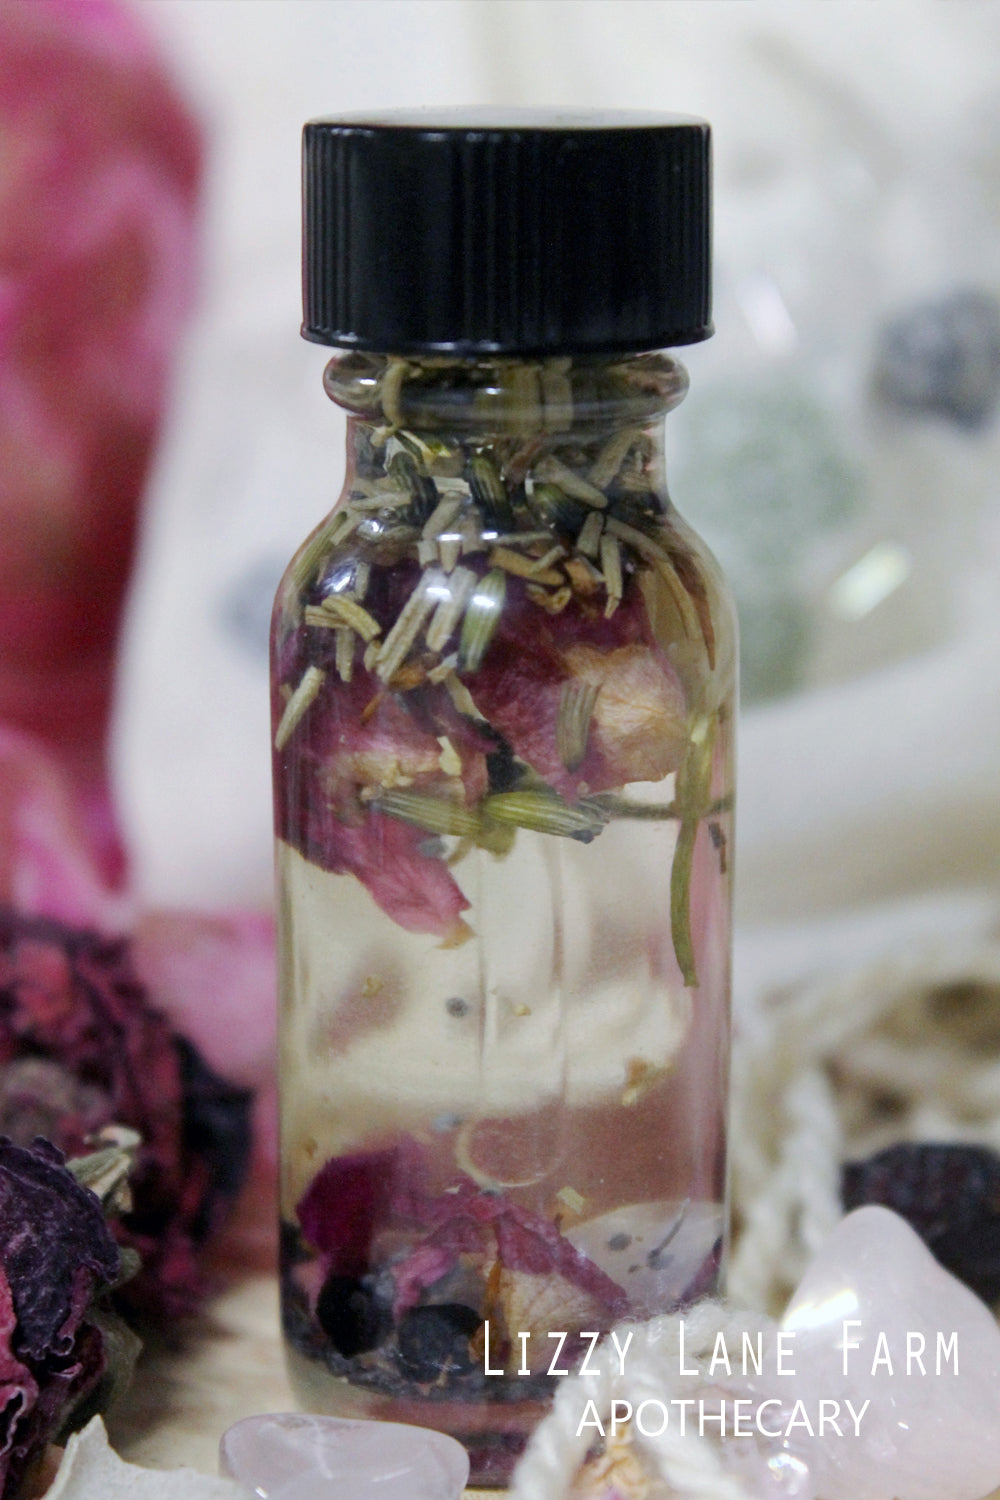 cottage garden fairy intention oil, wiccan spell oil